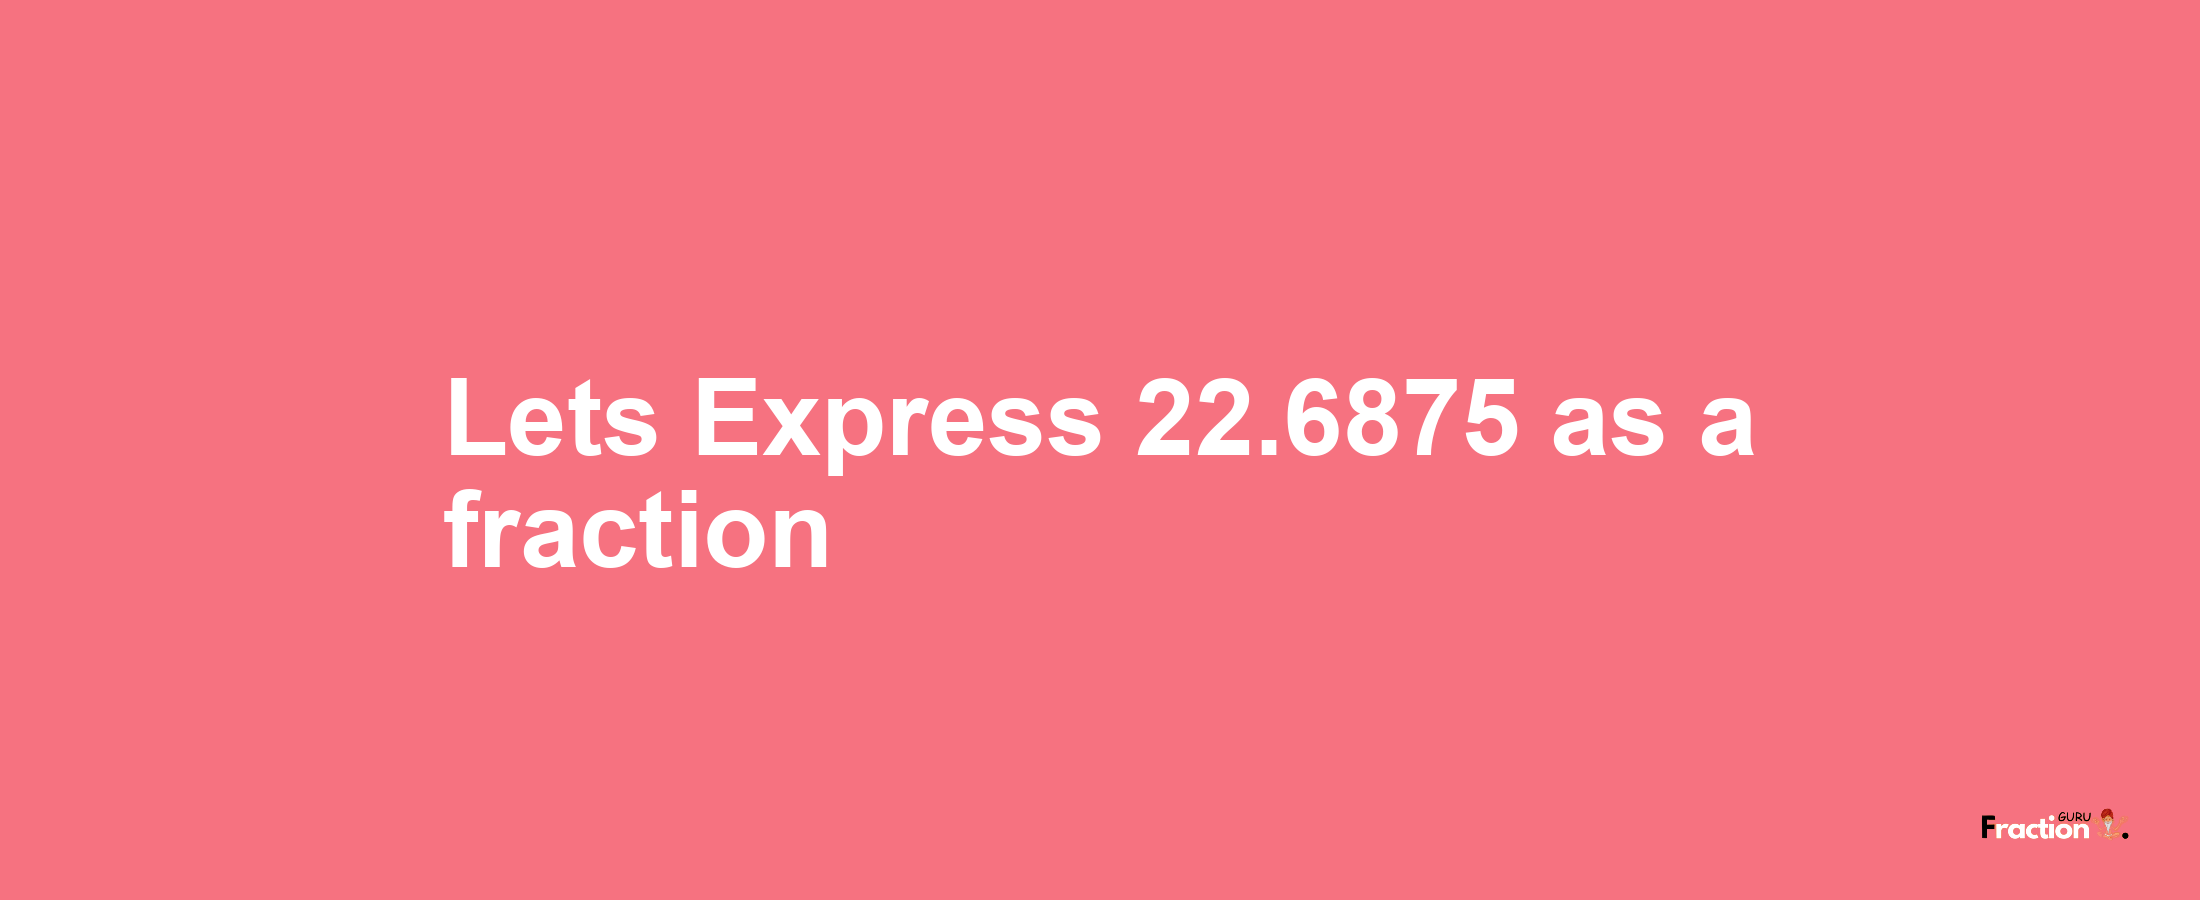 Lets Express 22.6875 as afraction